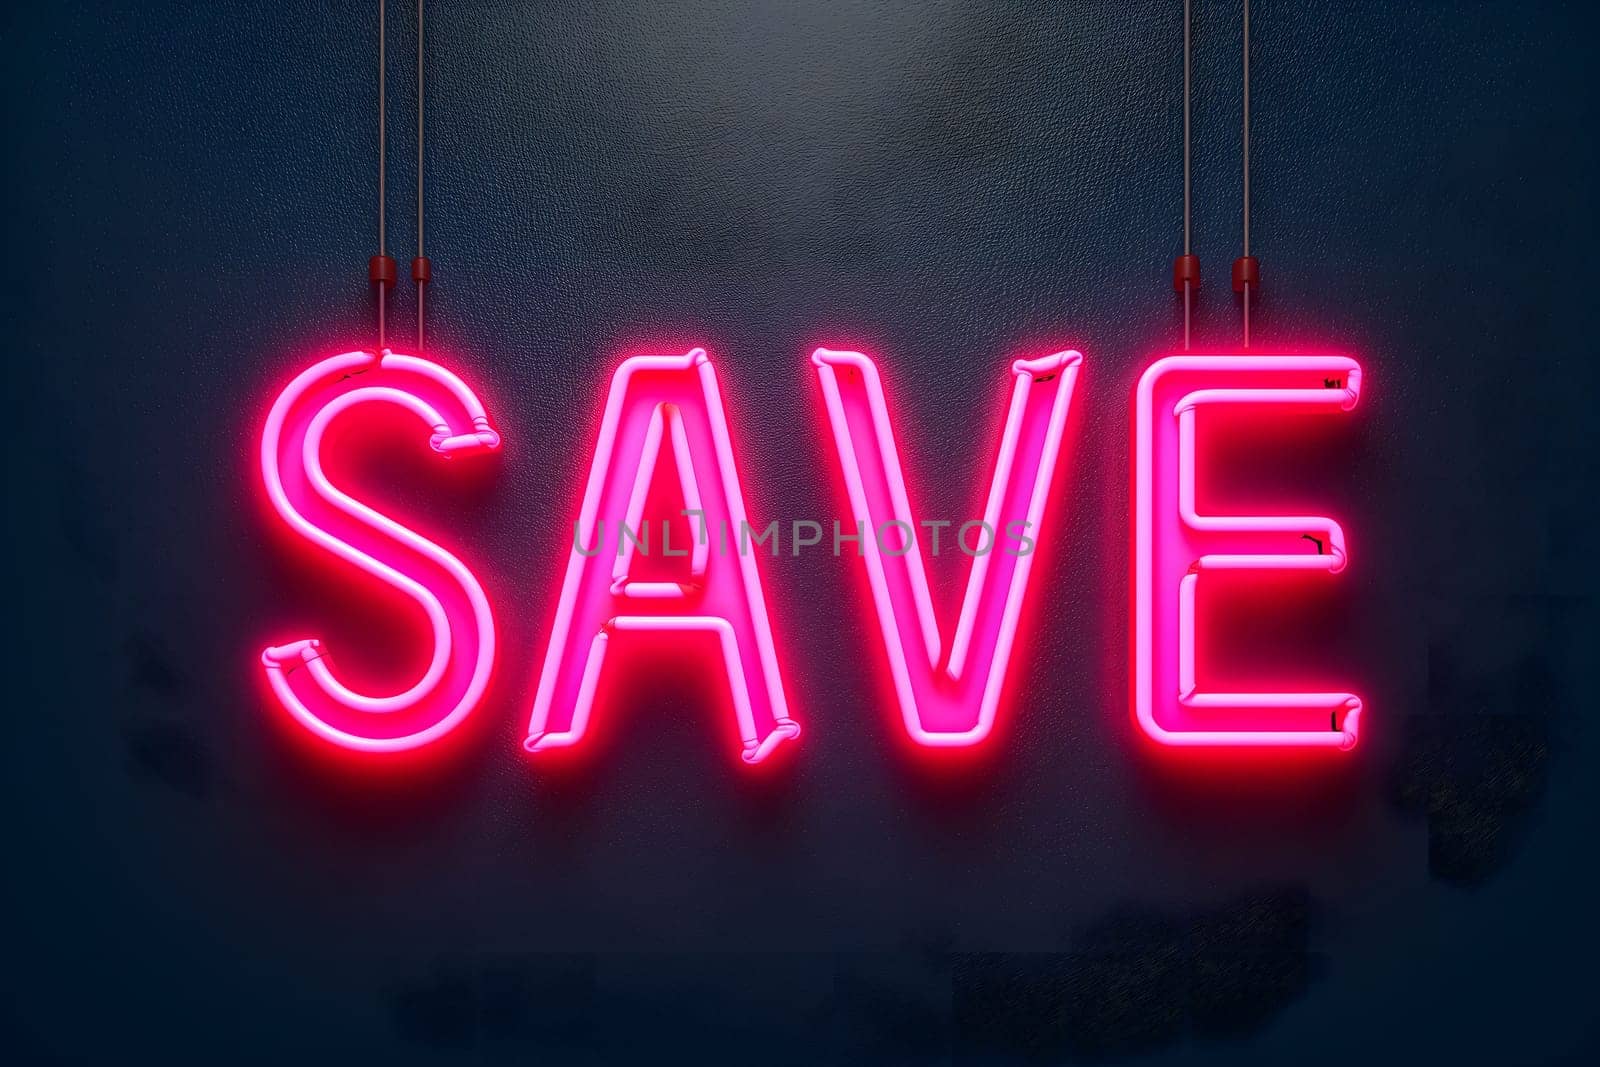 Neon word save on dark shabby wall. Neural network generated image. Not based on any actual scene or pattern.